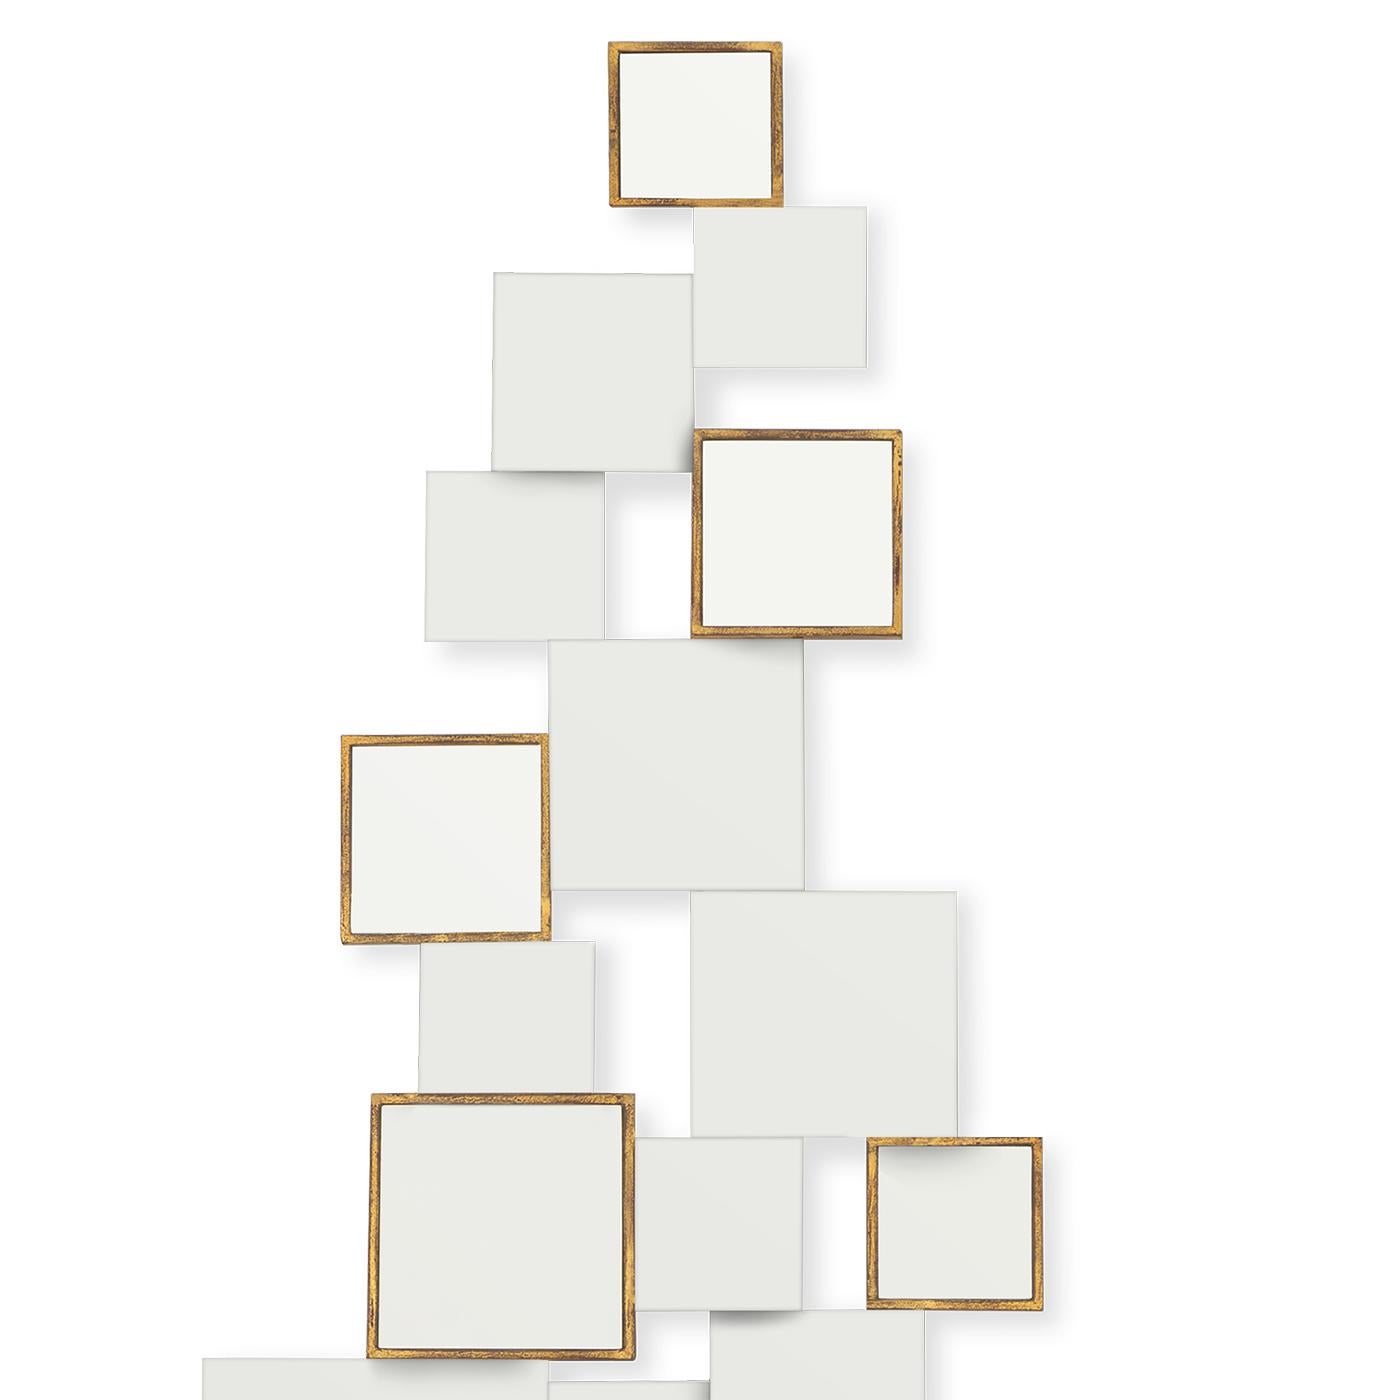 Mirror squares concept II with squares mirror
glass with polished edges and with squares mirror
glass with solid wood frames painted in antique
gold finish.
Available in:
L 57 x D 3 x H 130cm, price: 4250,00€
L 68 x D 3 x H 155cm, price: